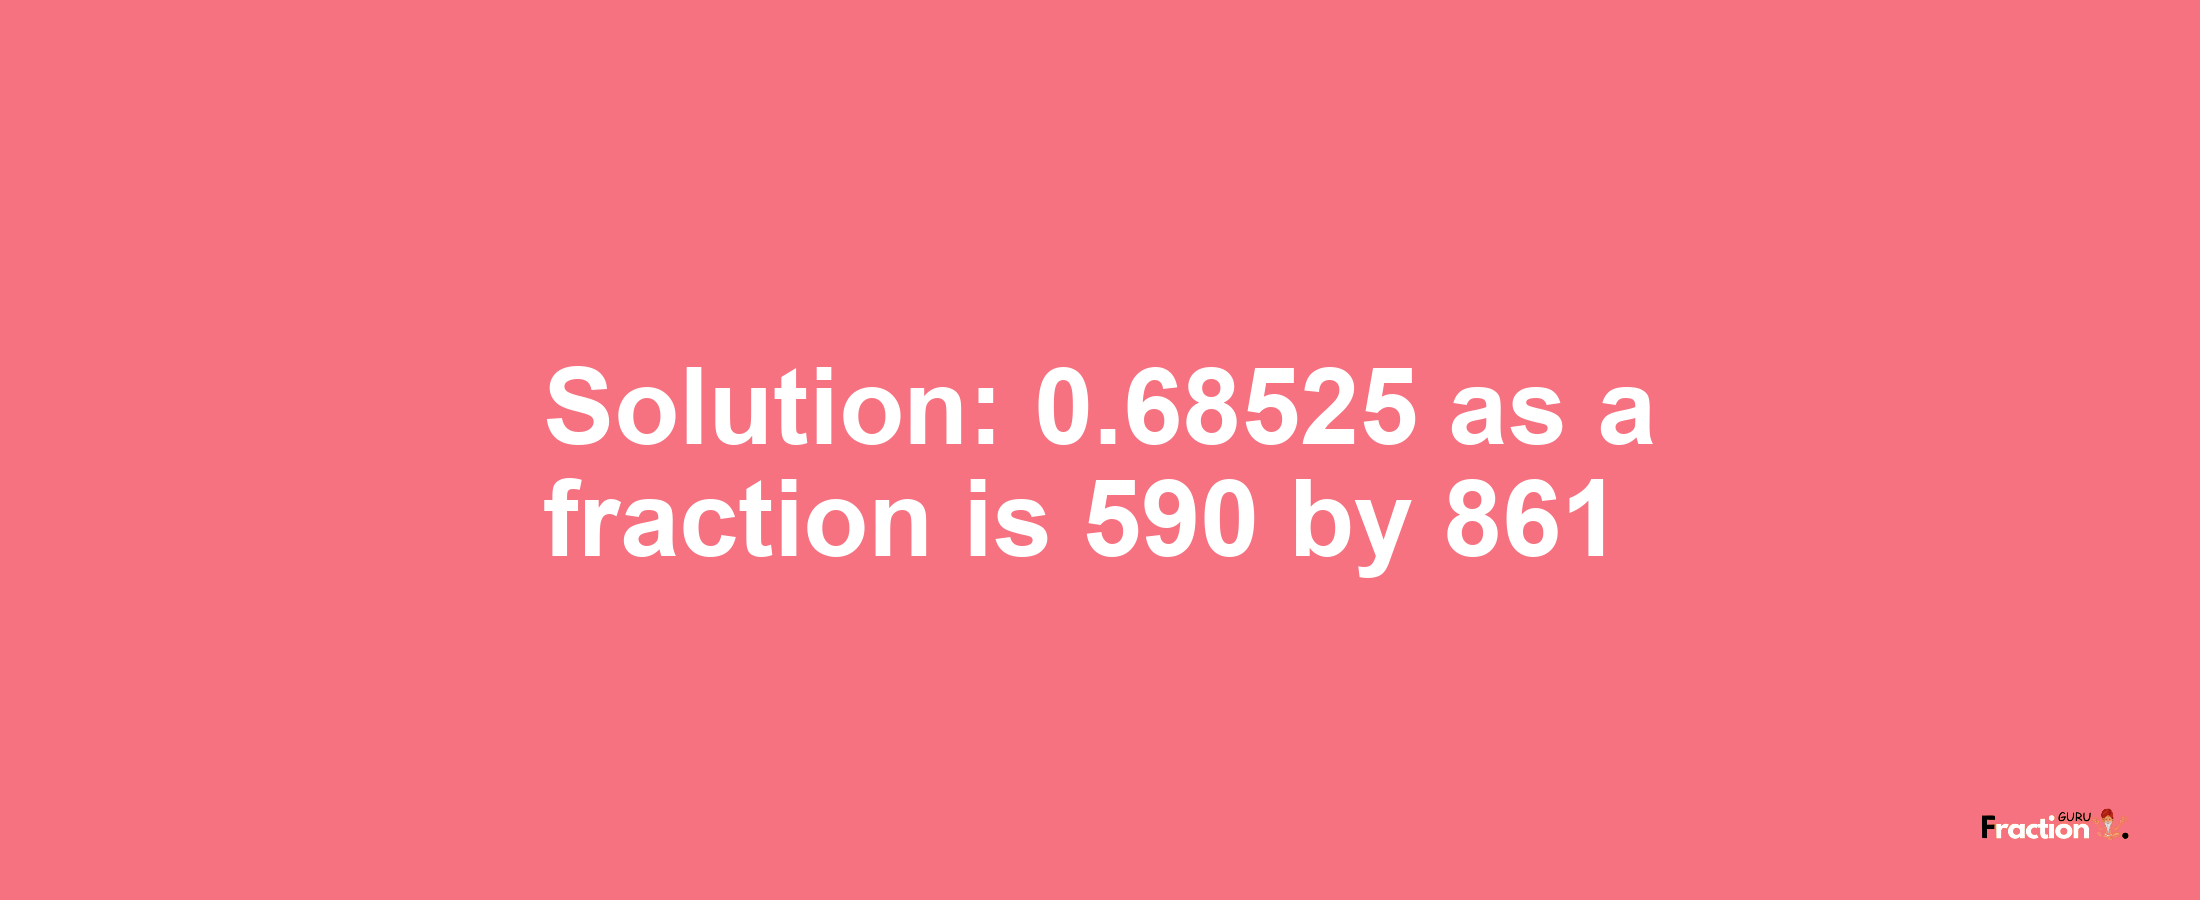 Solution:0.68525 as a fraction is 590/861